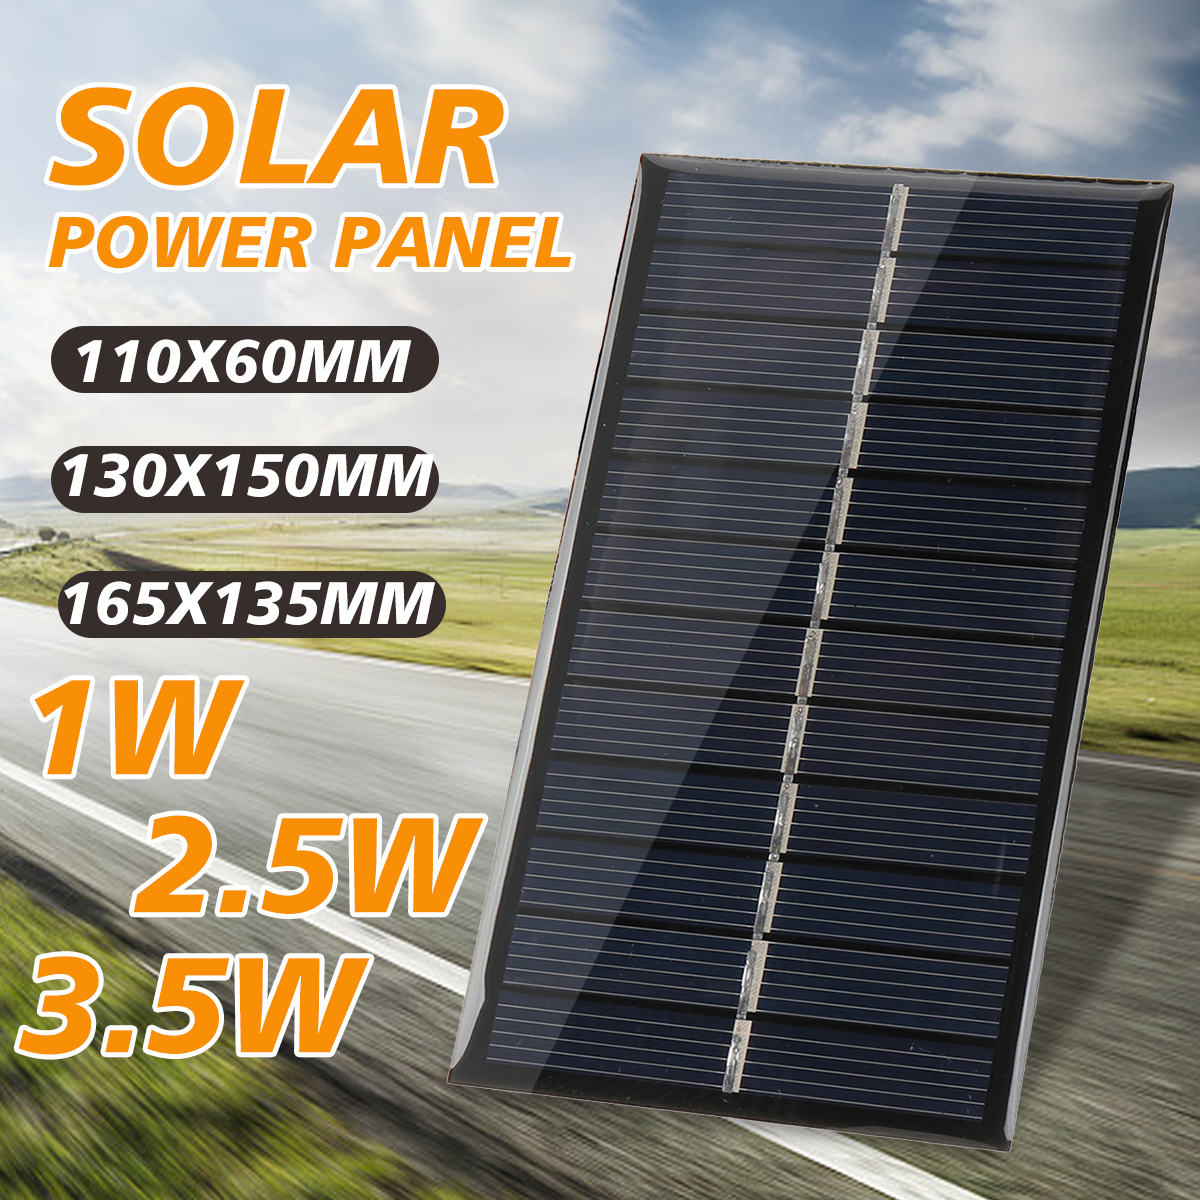 Portable-Solar-Power-Panel-1W-25W-35W-6V-USB-For-Battery-Cell-Phone-Charger-1932072-1